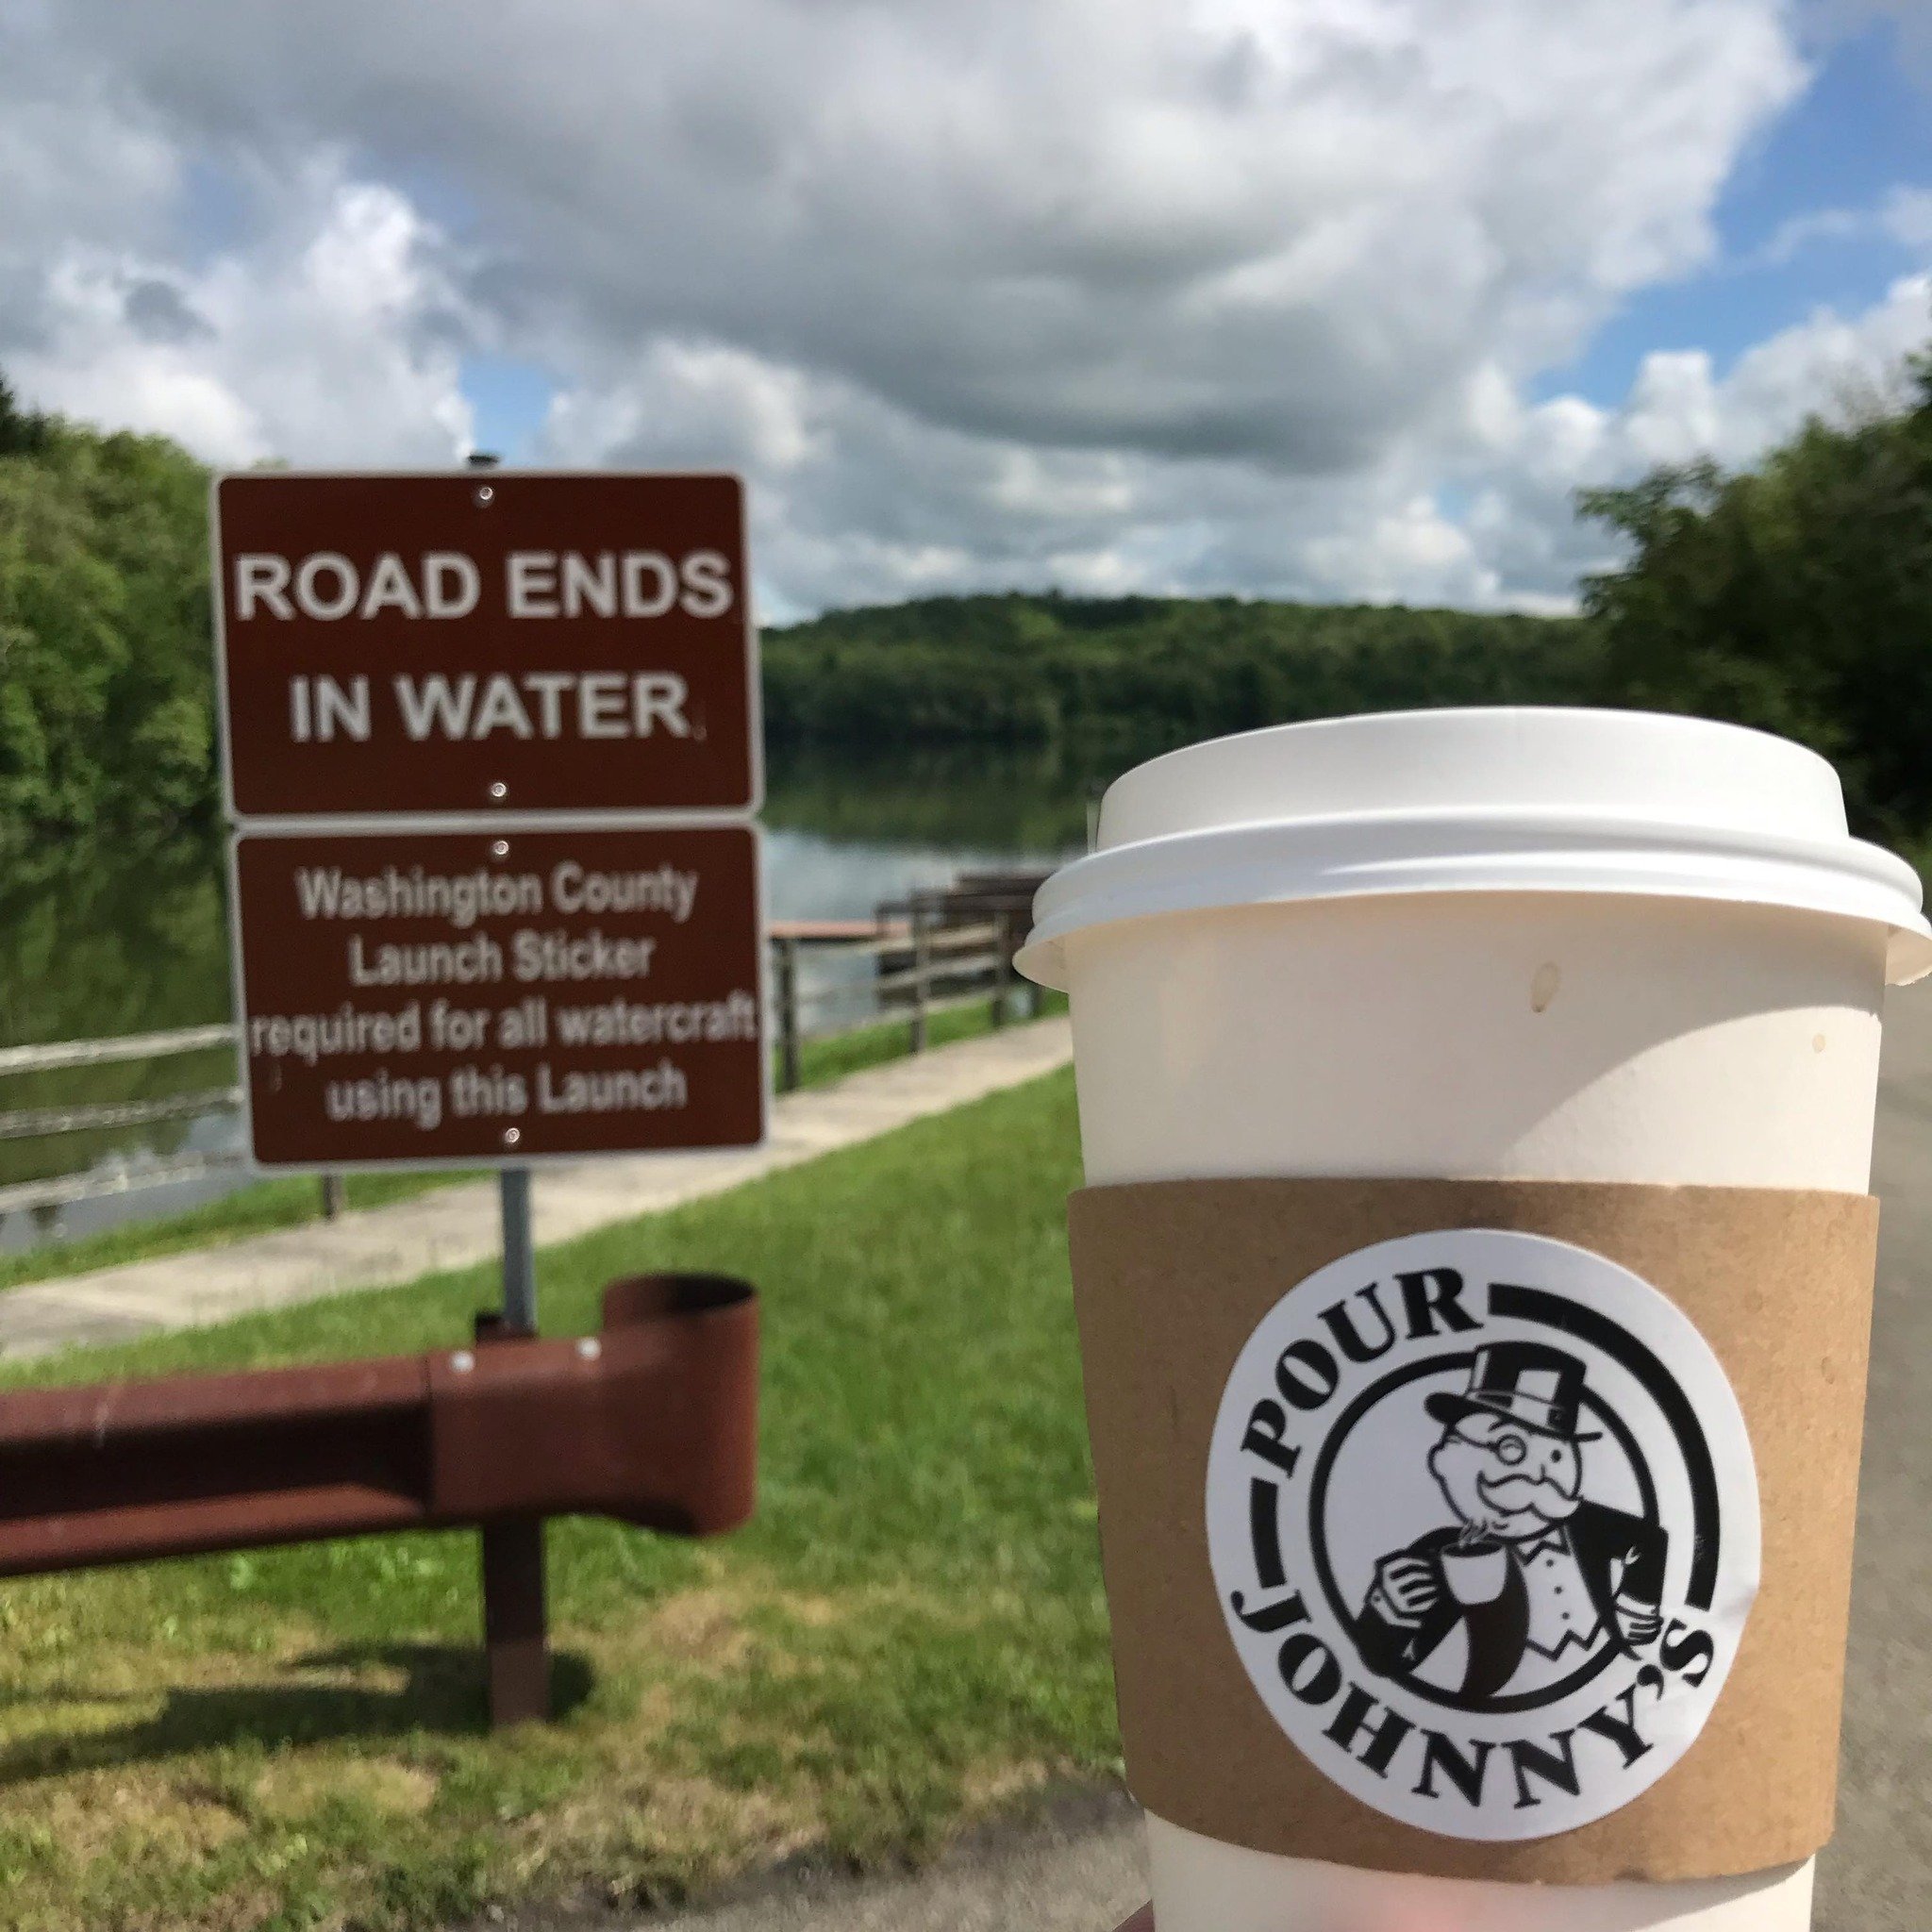 Weekend plans?  How about a latte, a hike  or paddle around the lake and a look around the store?  Cool collectibles, farmhouse finds, and vintage treasures added daily.  Thursday - Saturday 10 am - 5 pm &amp; Sunday 11 am - 4 pm. 

#poorjohnnys #cro